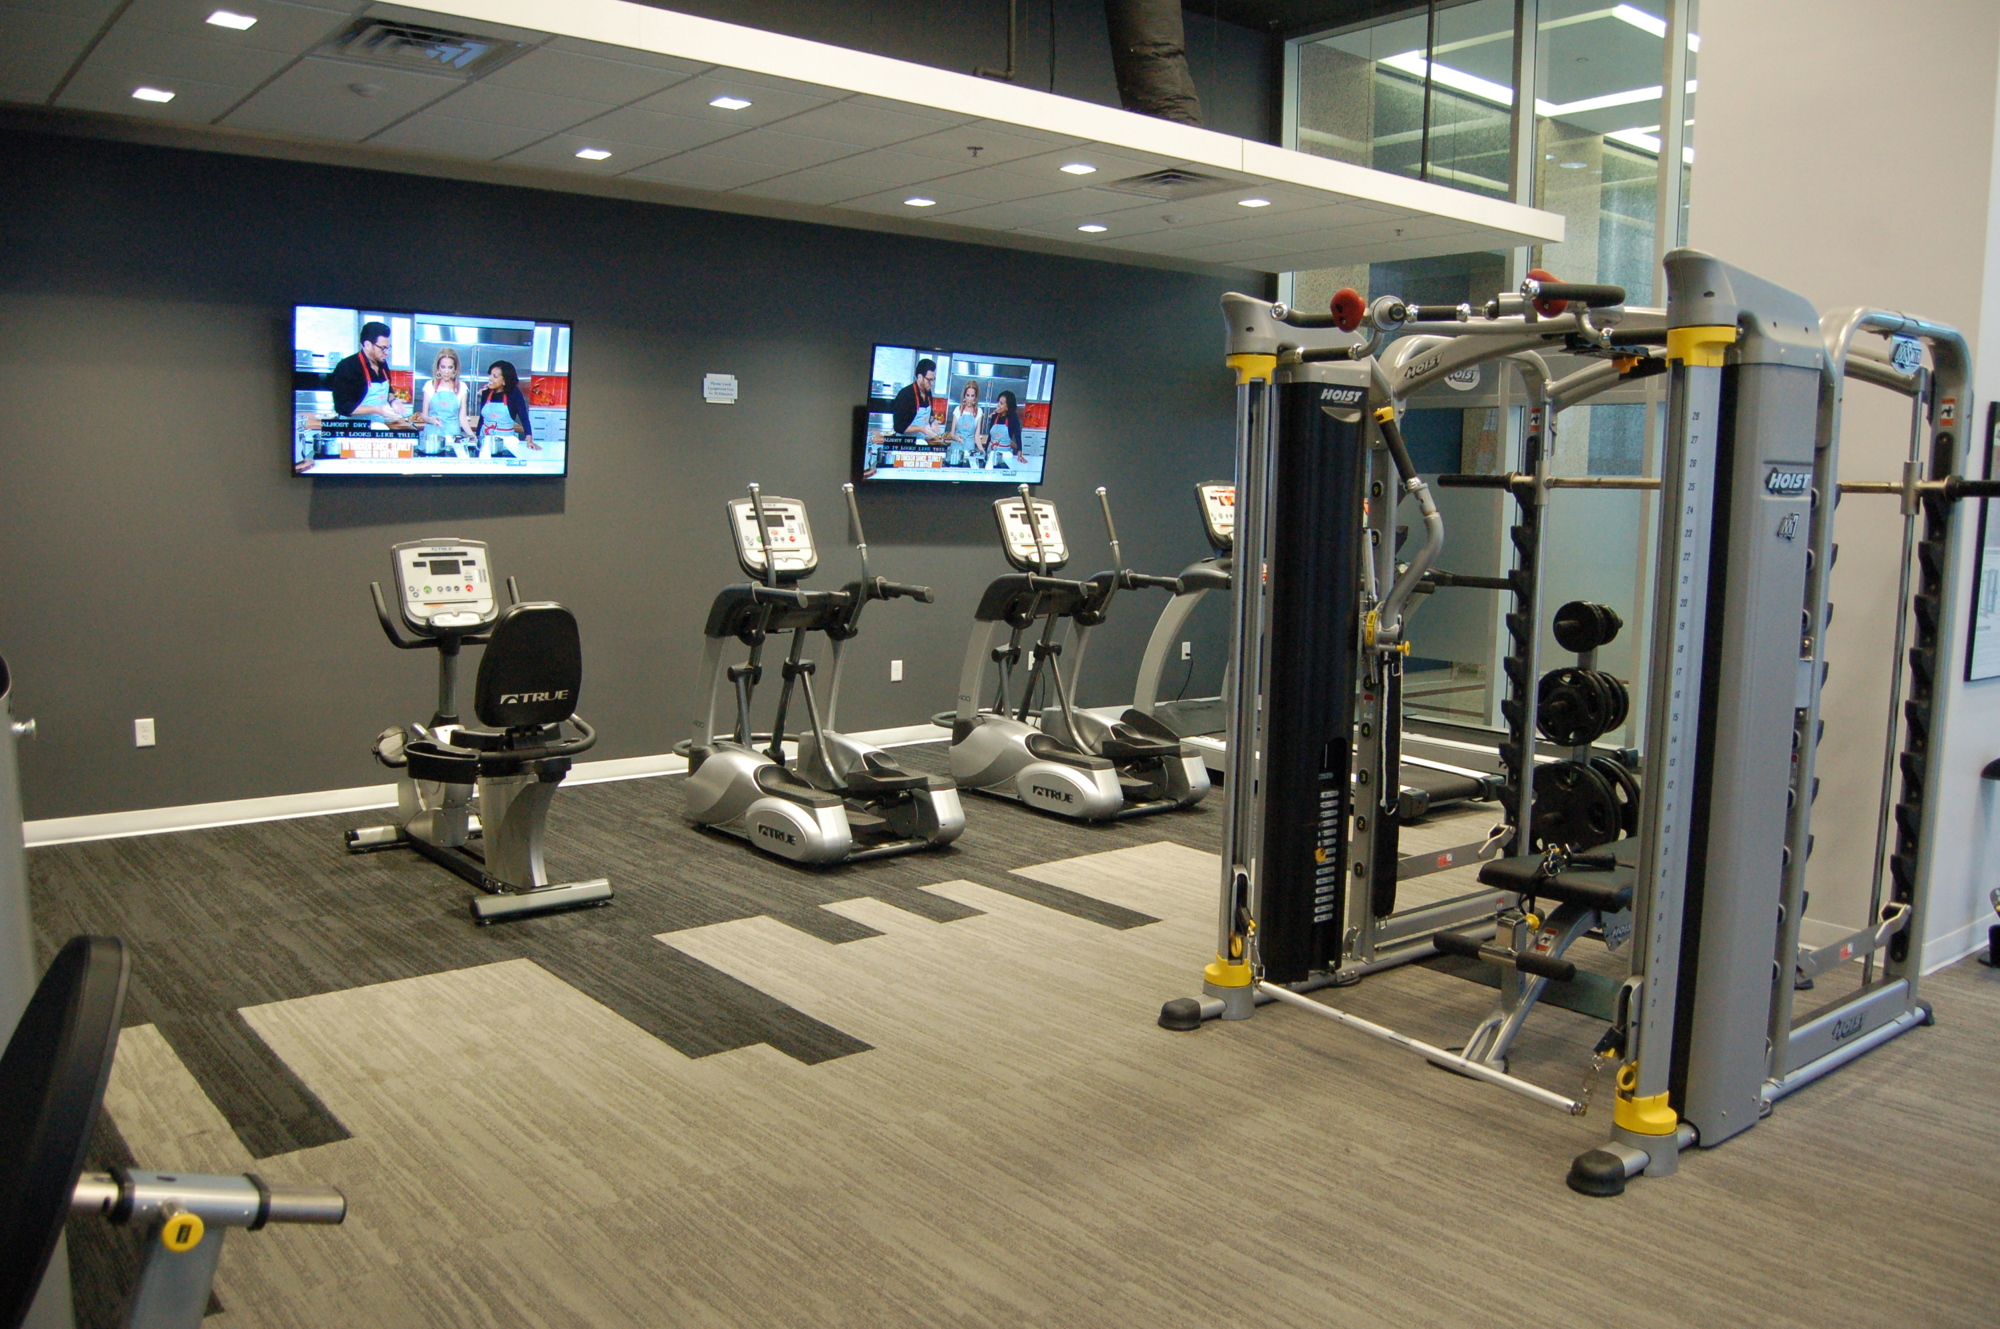 SunTrust Tower has a new fitness center for tenants that’s open 6 a.m. to 8 p.m. Monday-Friday.